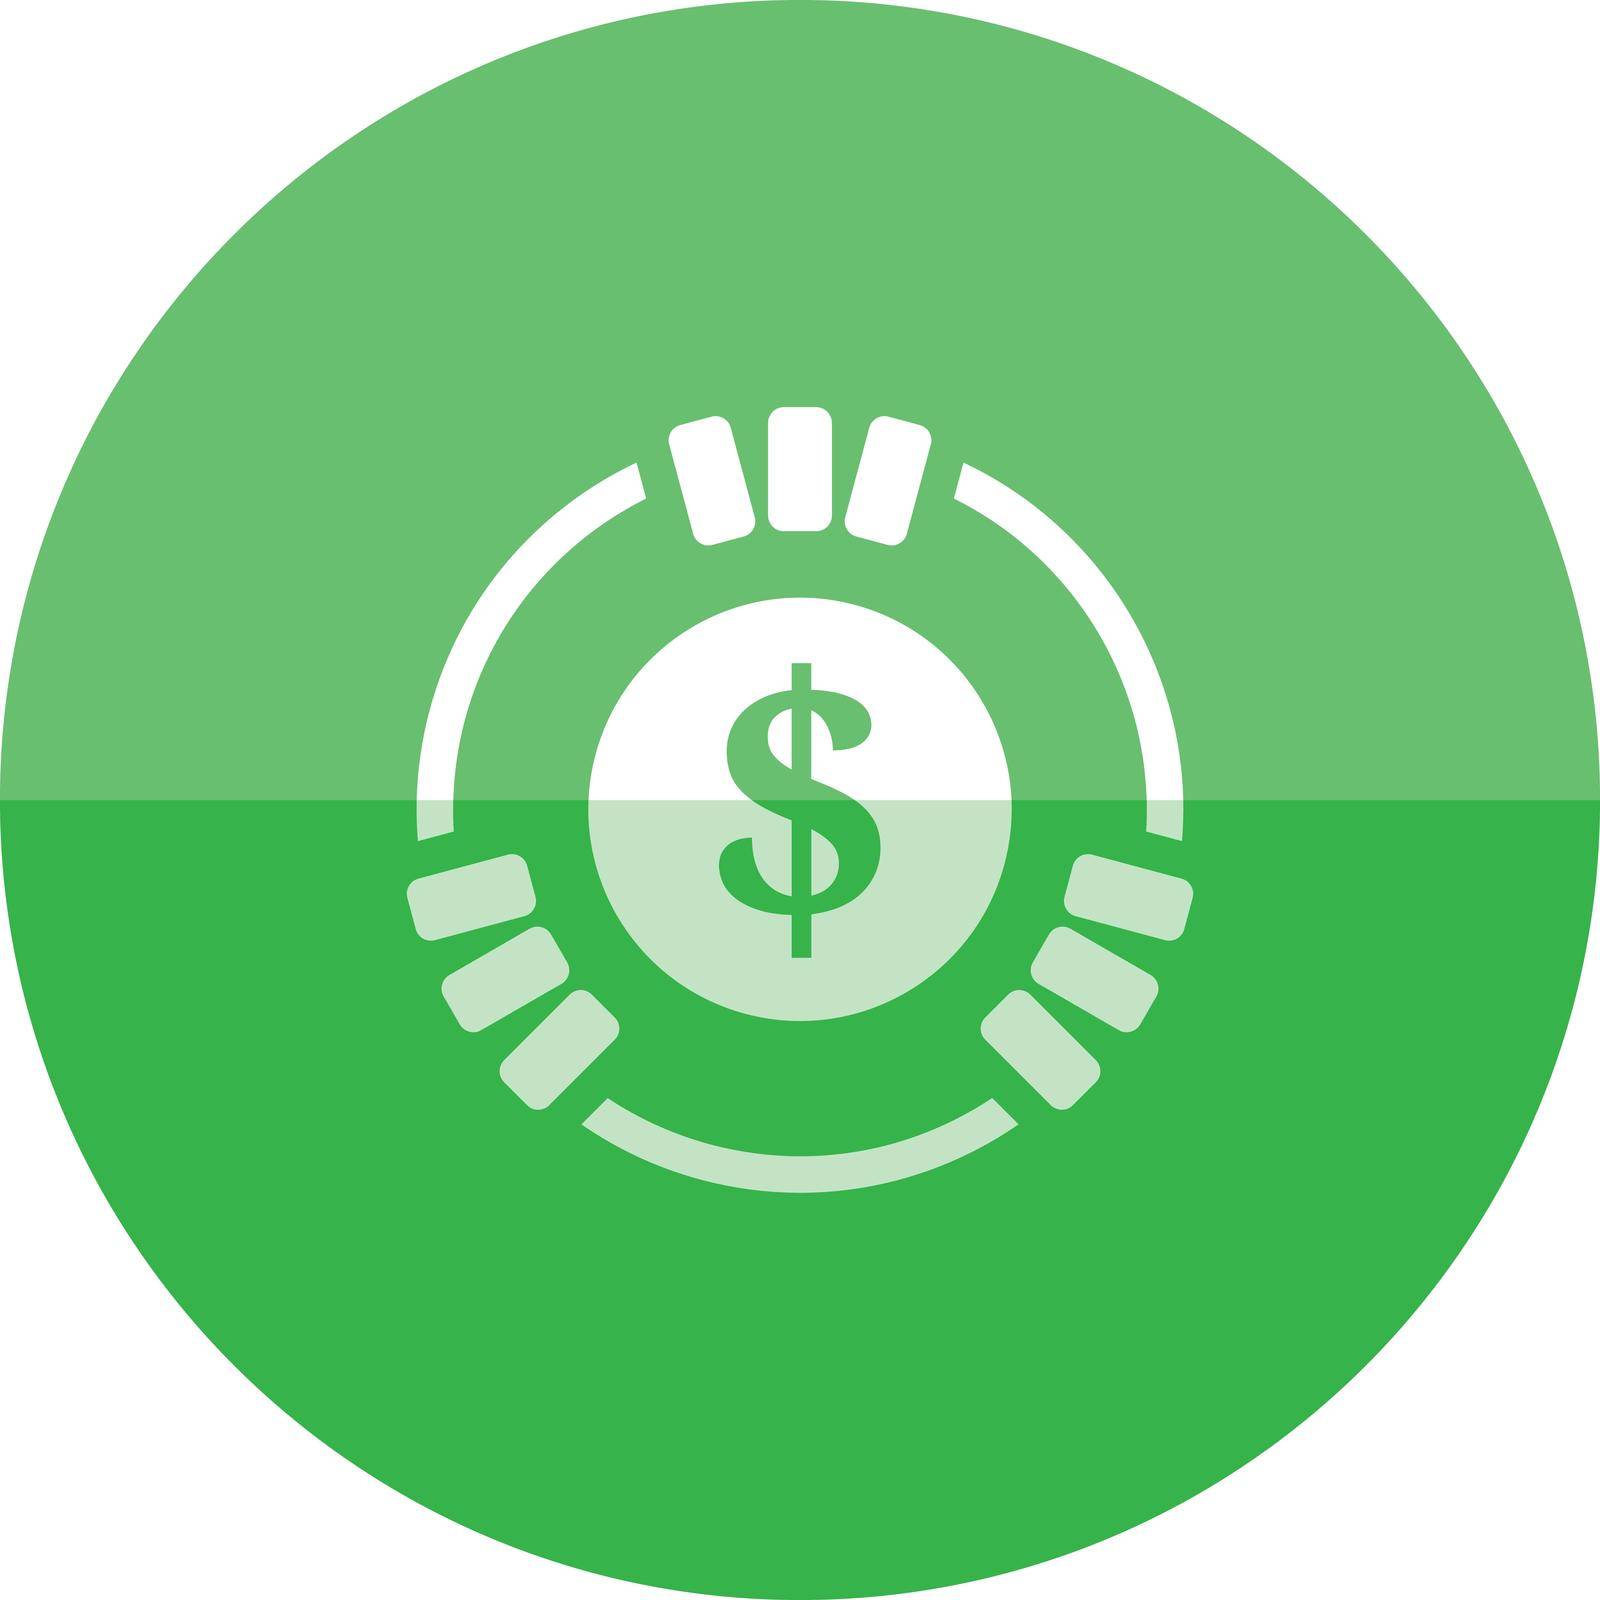 Gambling coin icon in flat color circle style. Leisure activity bet chance roulette jackpot